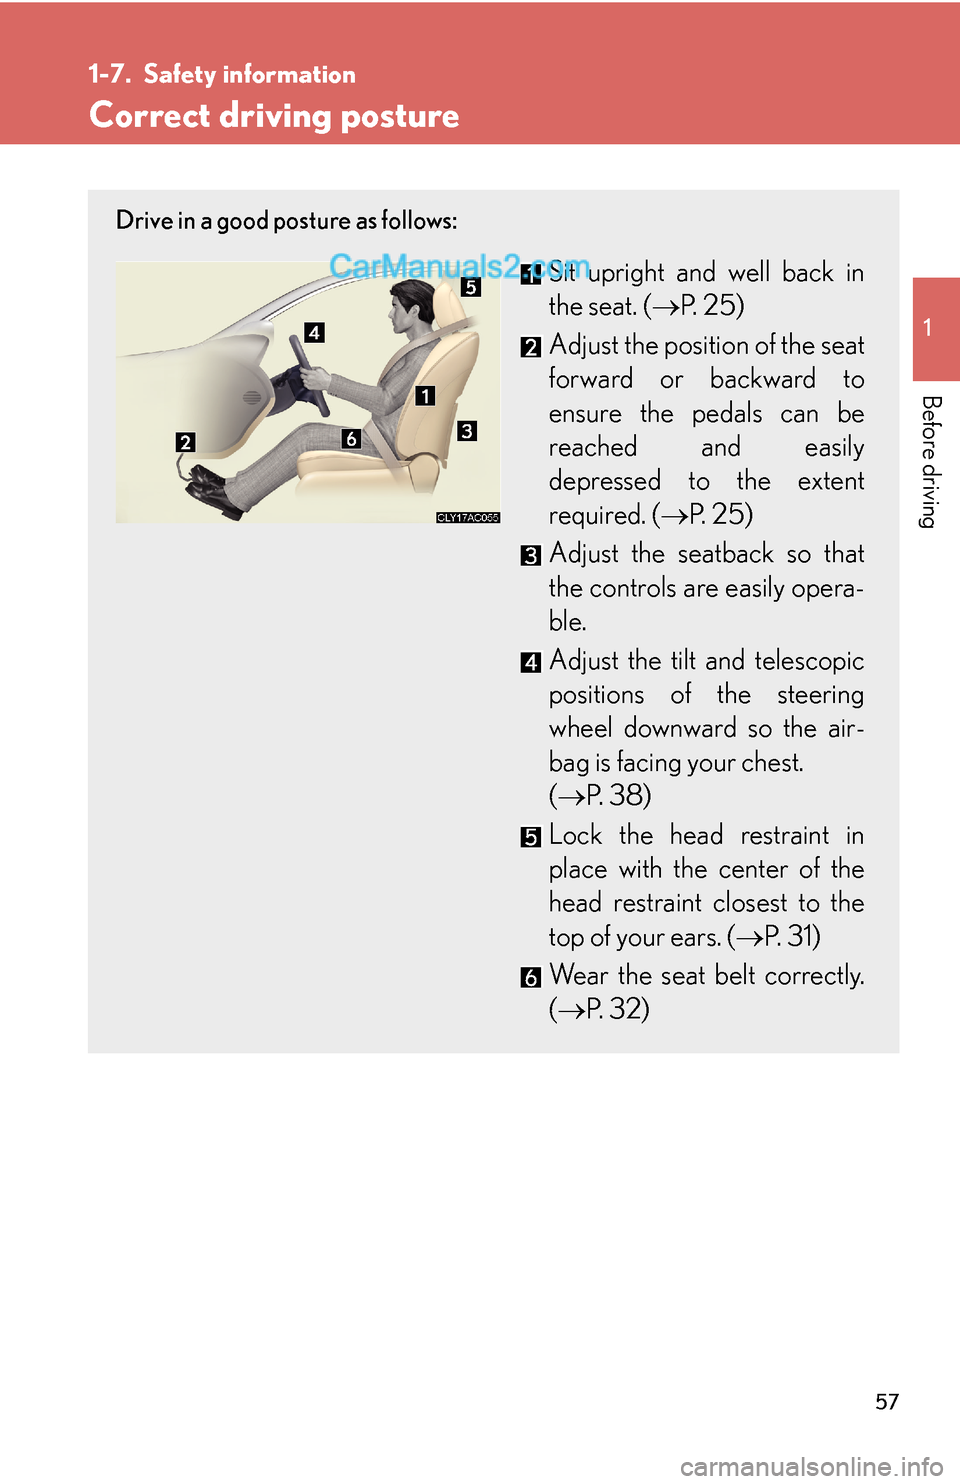 Lexus ES350 2007  Safety information 57
1
Before driving
1-7. Safety information
Correct driving posture
Drive in a good posture as follows:
Sit upright and well back in
the seat. (→P.  2 5 )
Adjust the position of the seat
forward or 